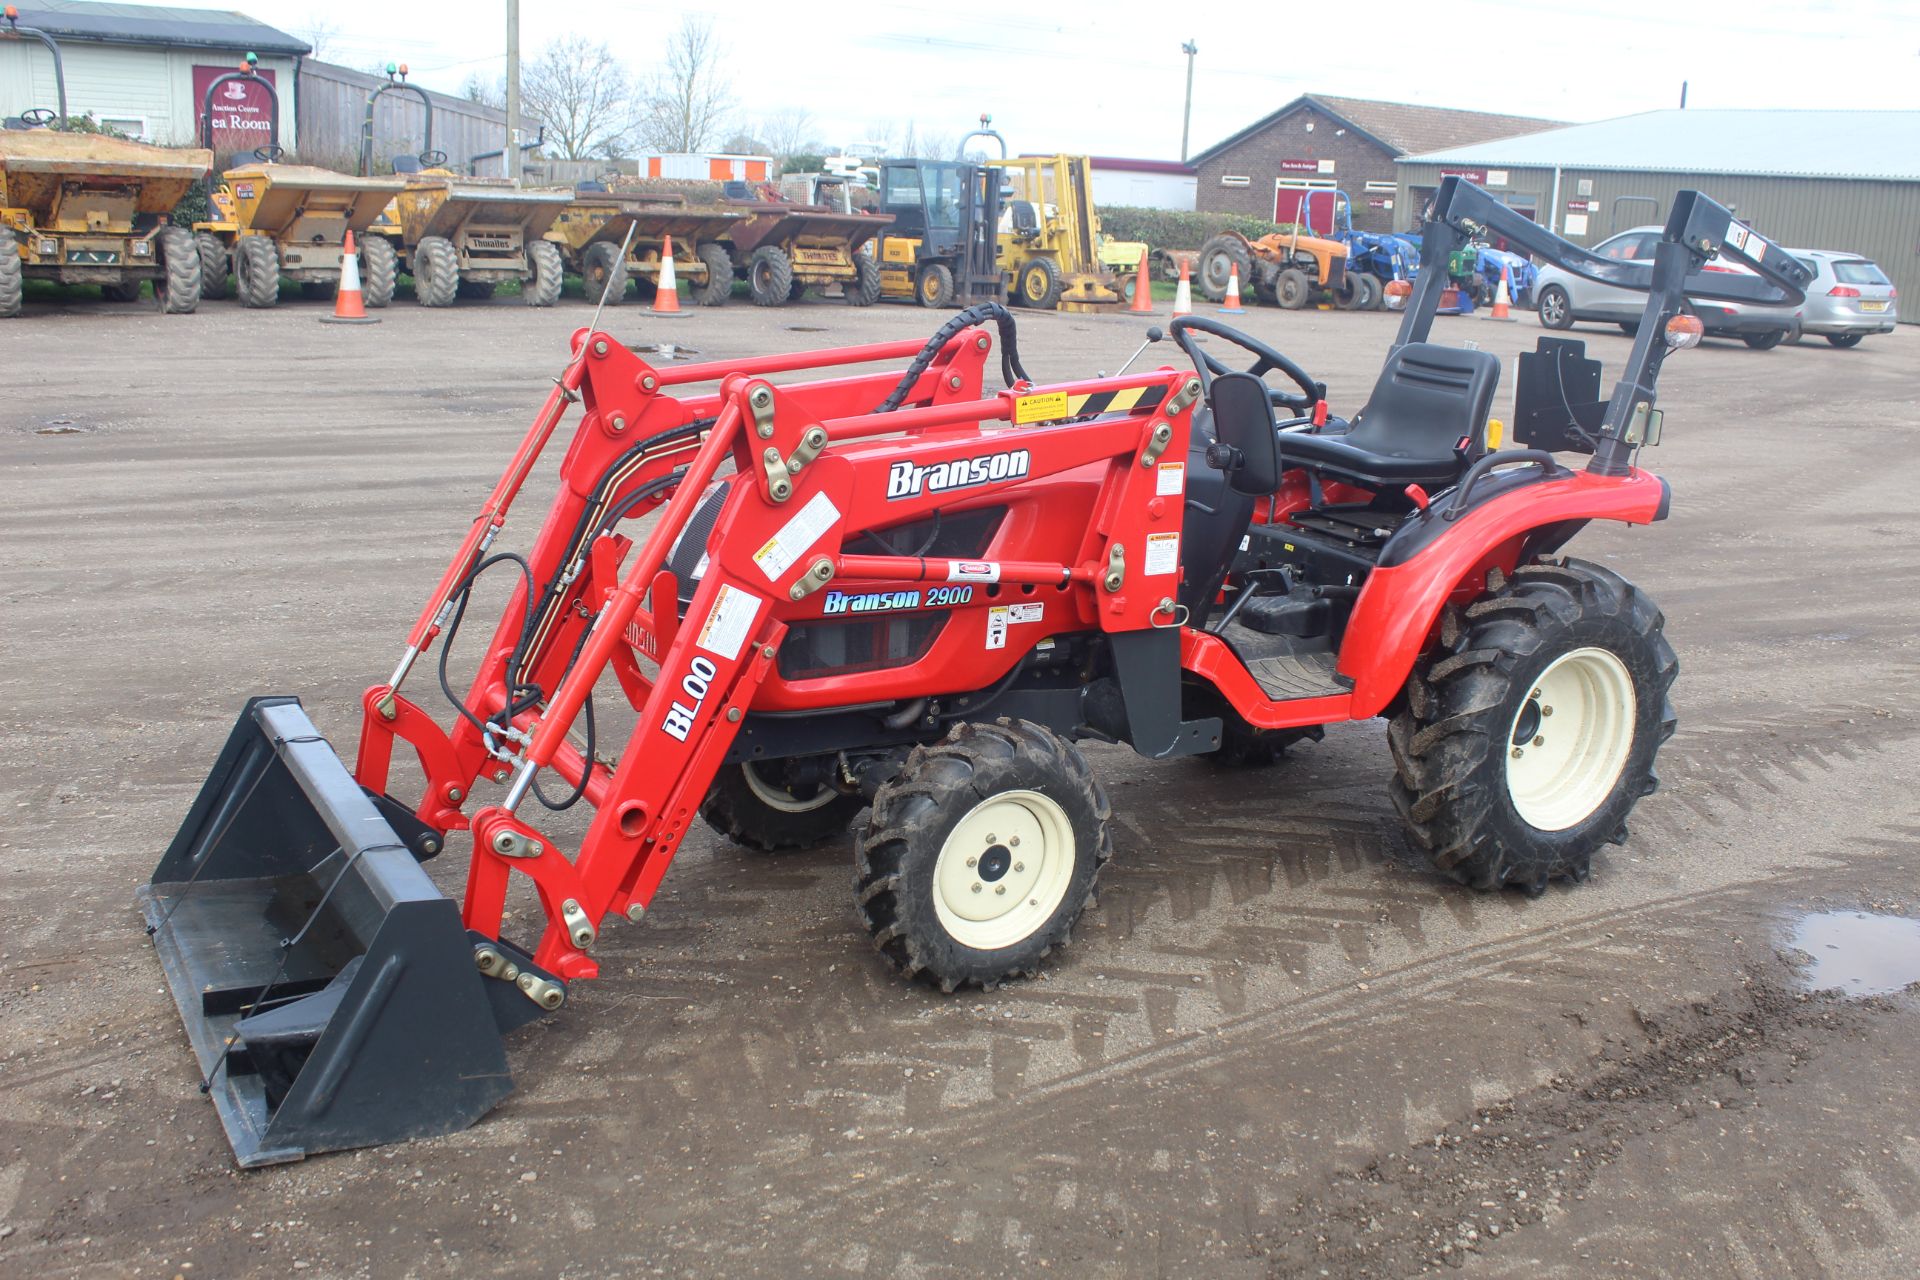 Branson 2900 4WD compact tractor. Registration NK67 EAF. Date of first registration 31/12/2016. 9.